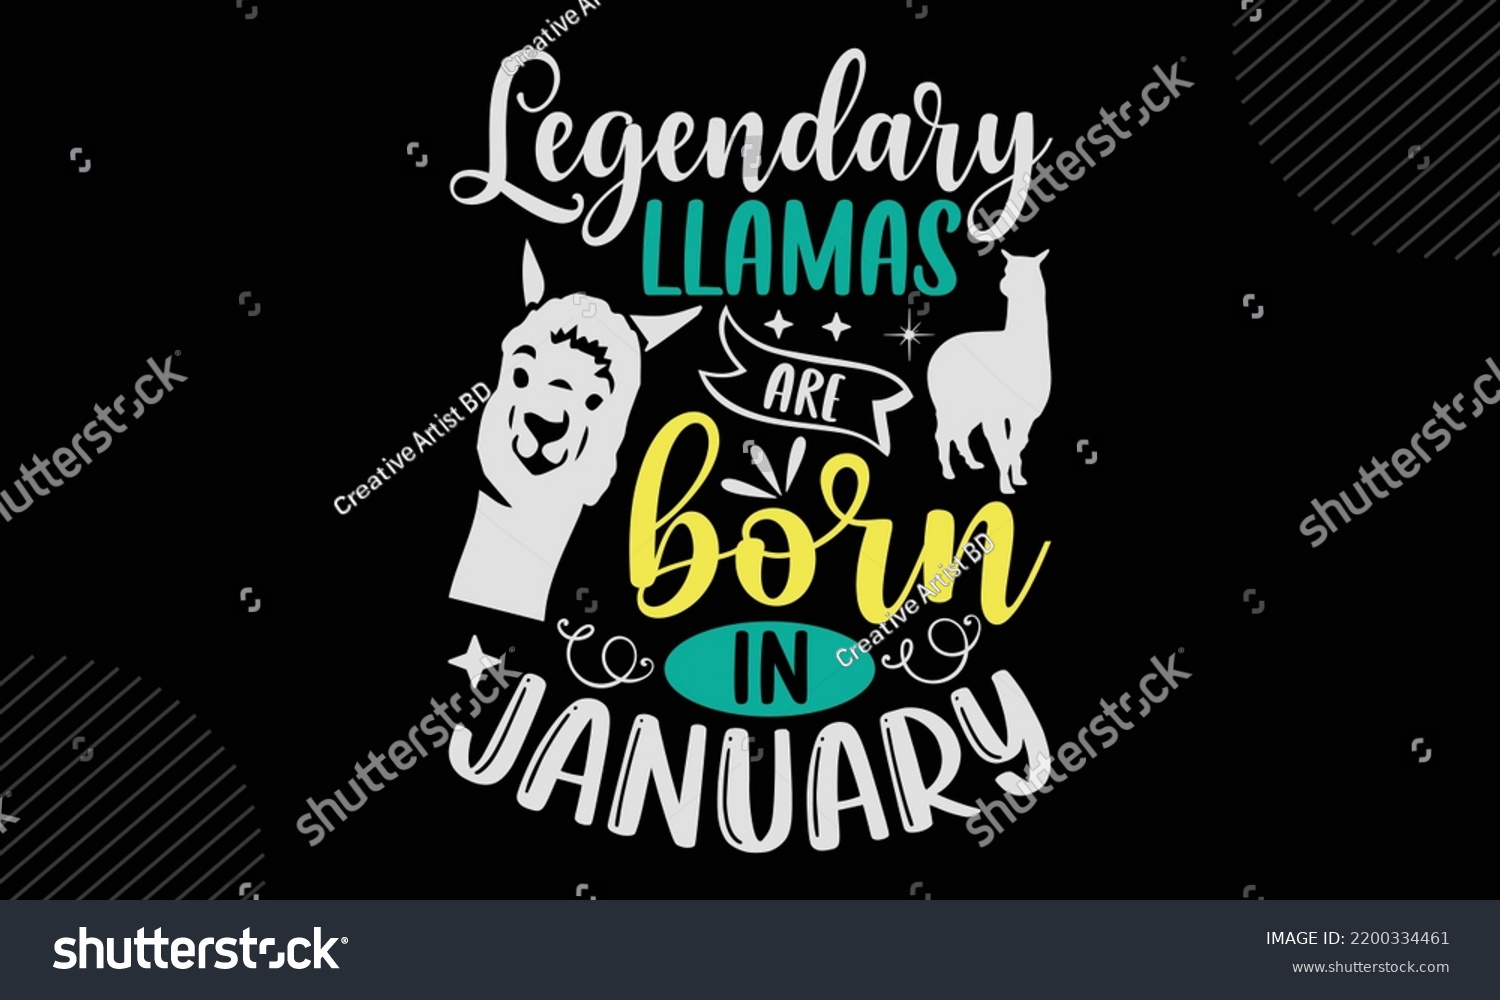 SVG of Legendary Llamas Are Born In January - Llama T shirt Design, Hand drawn vintage illustration with hand-lettering and decoration elements, Cut Files for Cricut Svg, Digital Download svg